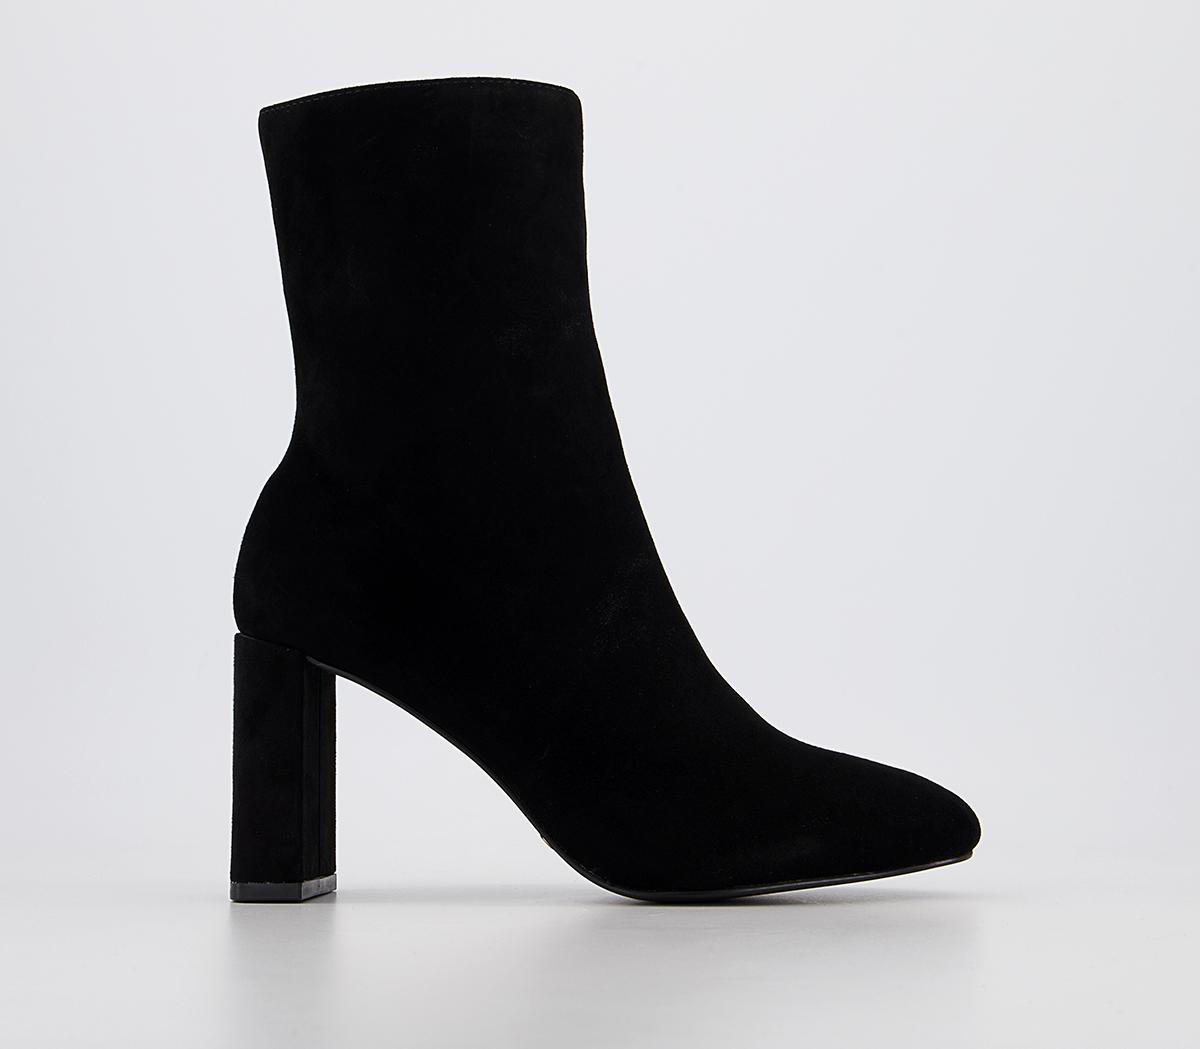 OFFICE Attic Block Heel Pull On Ankle Boots Black Suede - Women's Ankle Boots